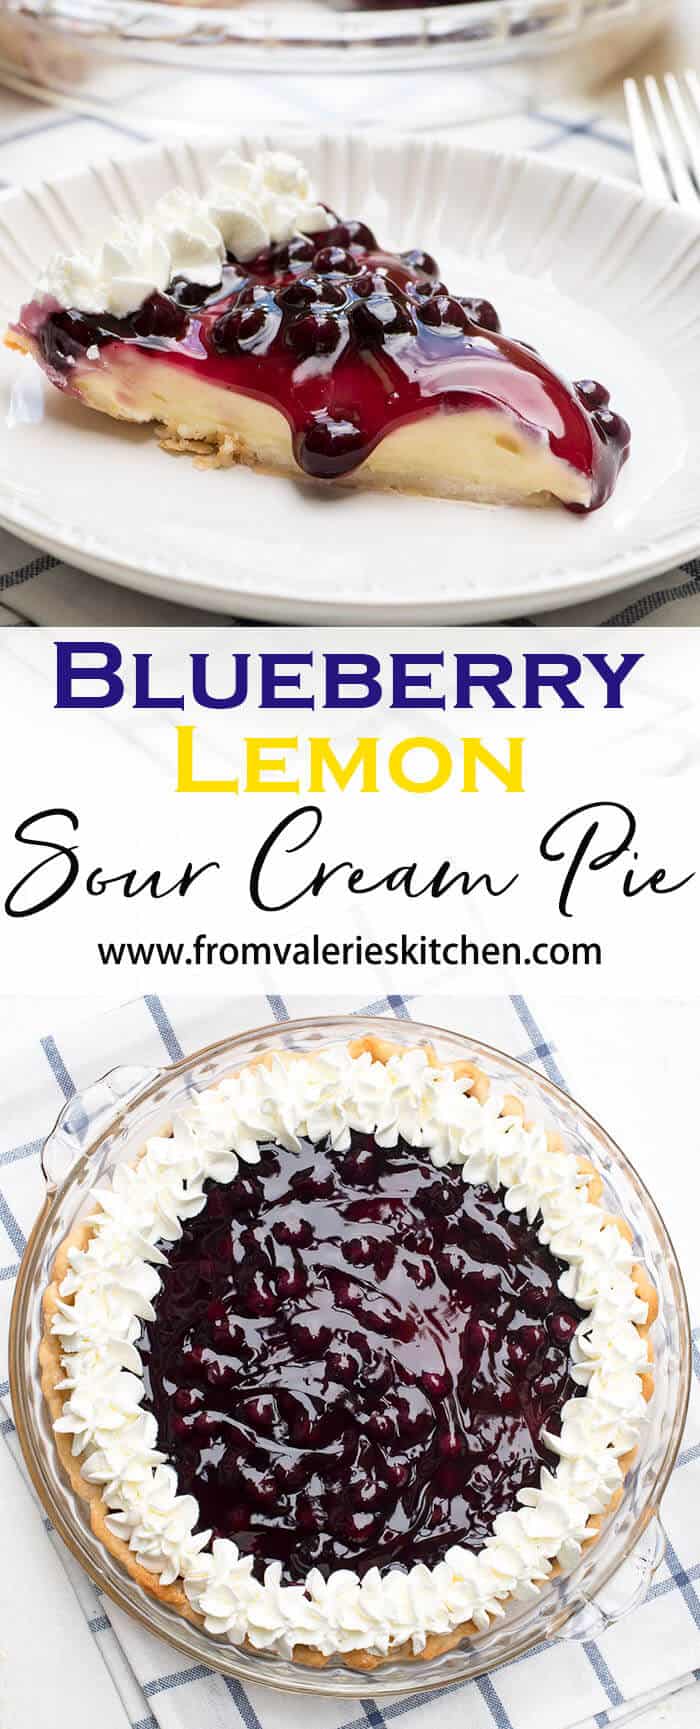 A two image vertical collage of Blueberry Lemon Sour Cream Pie with overlay text.